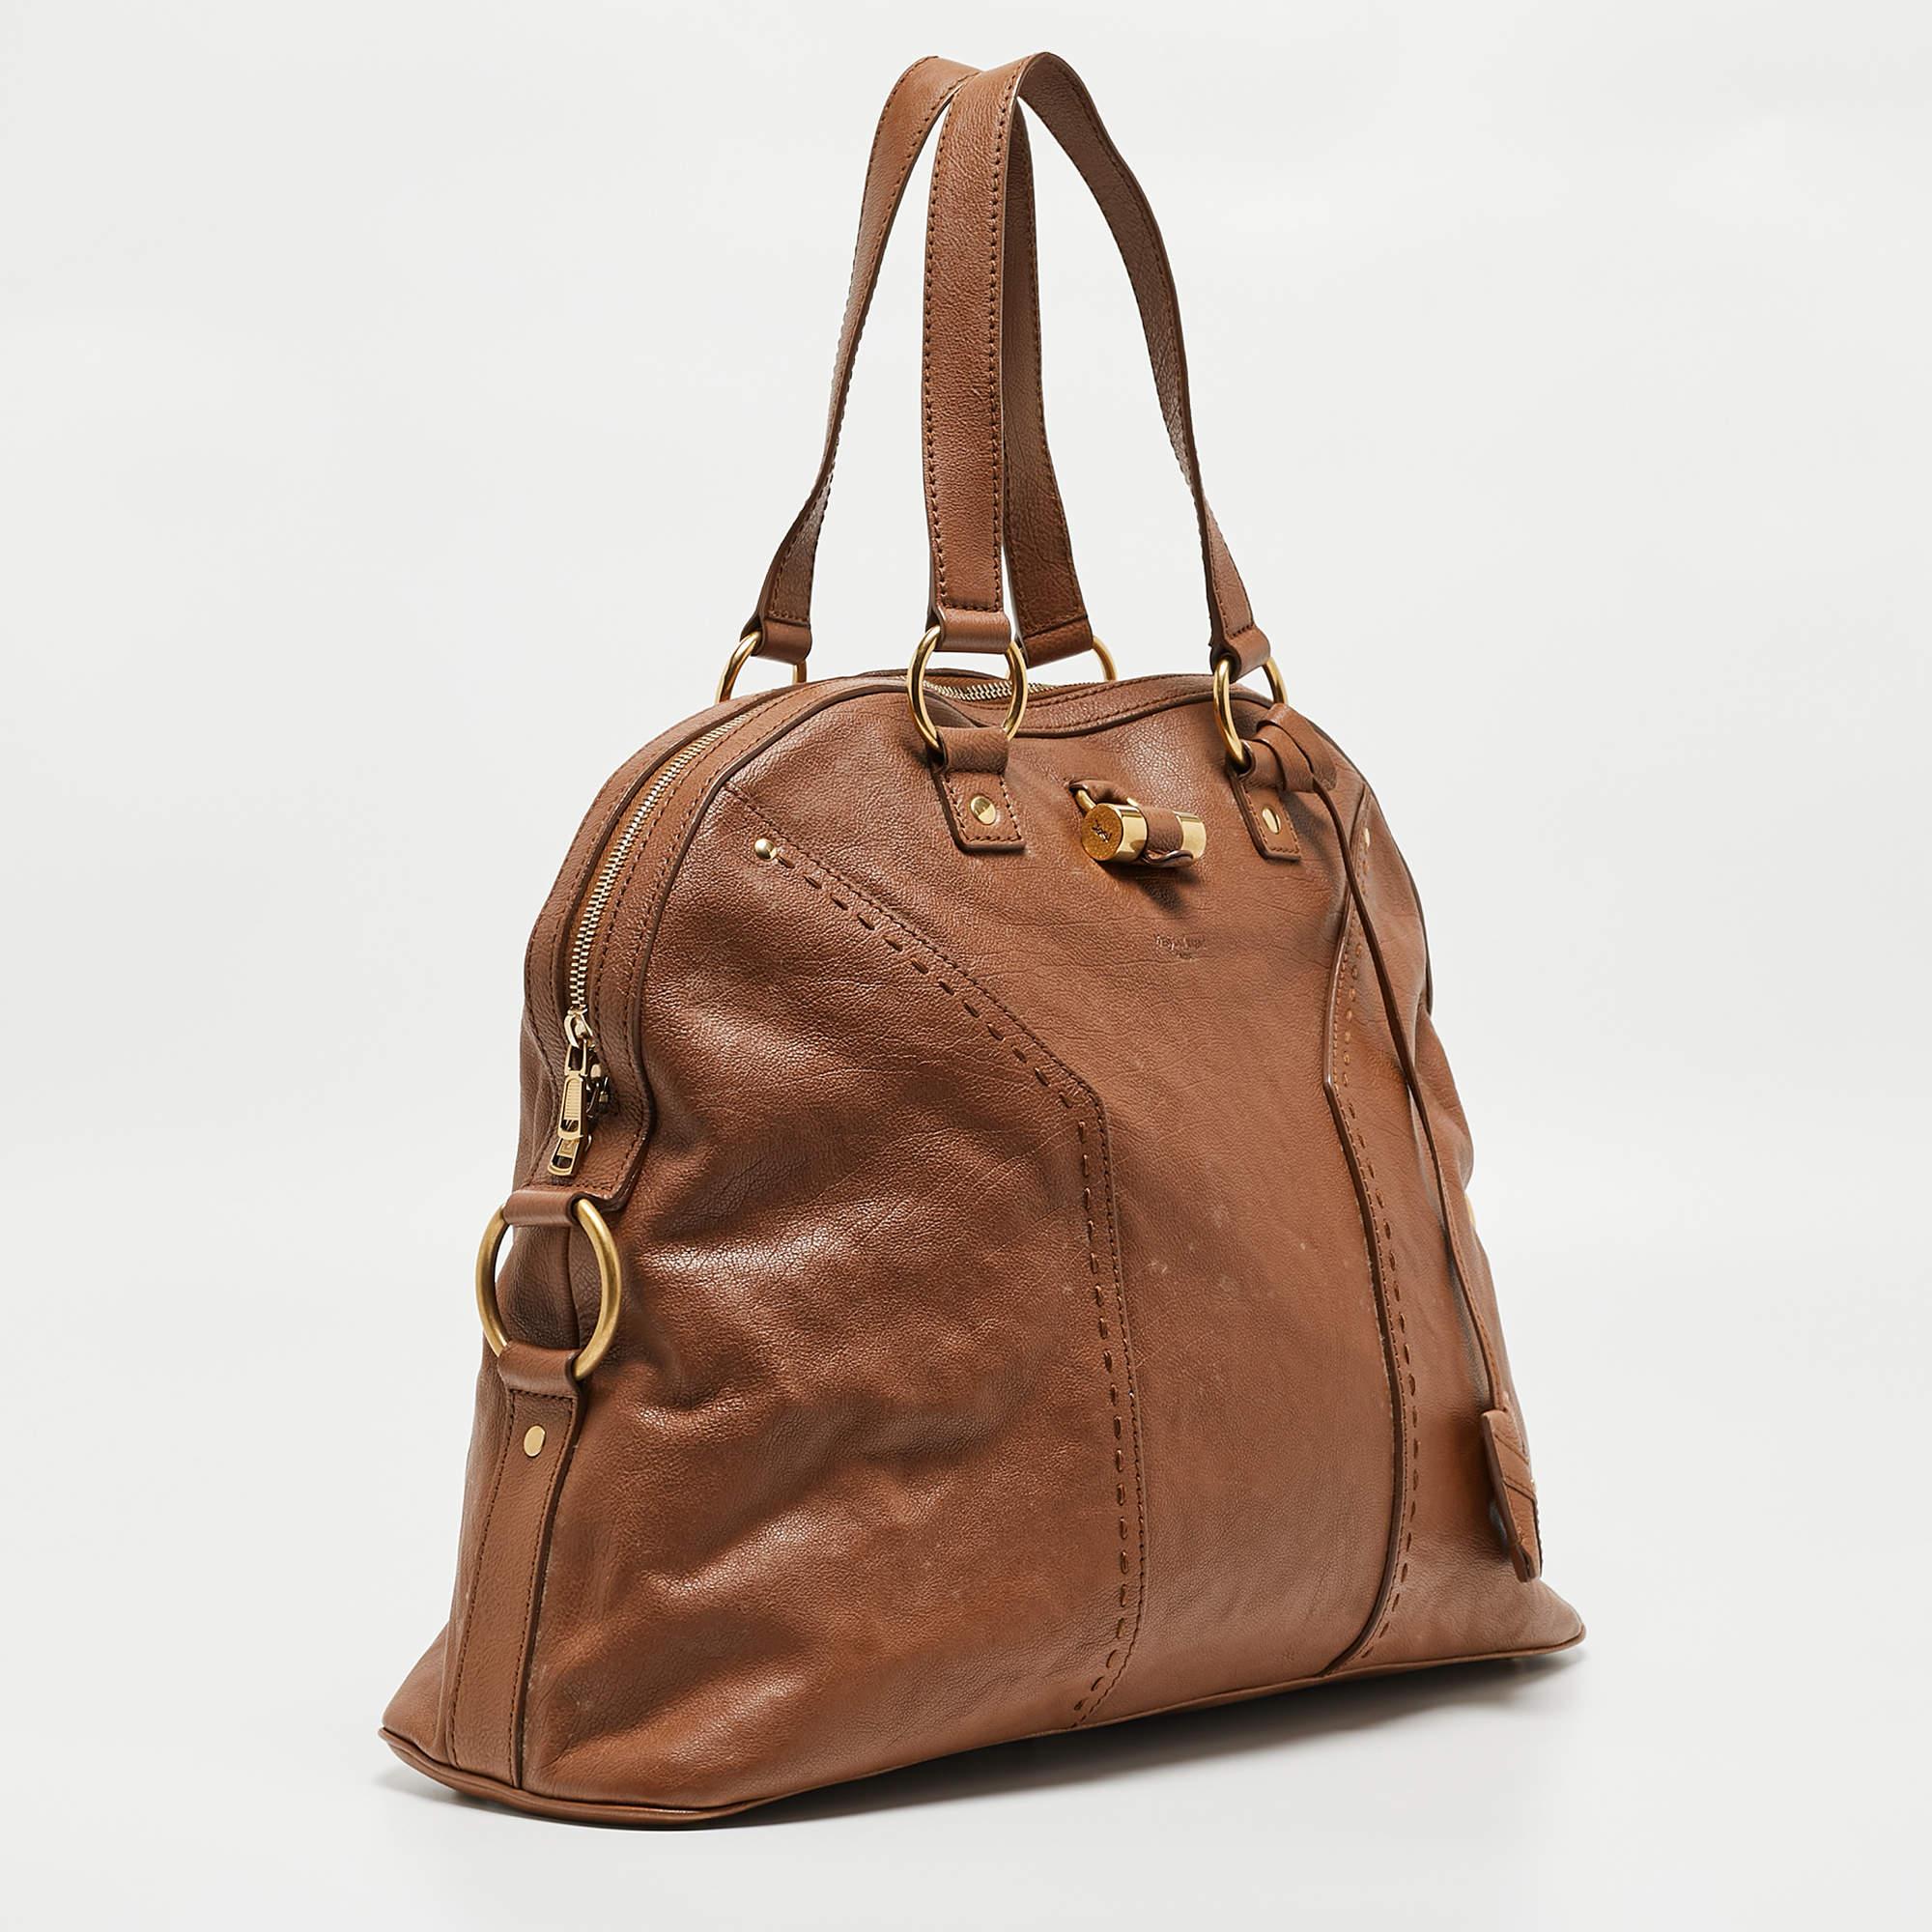 Yves Saint Laurent Brown Leather Oversized Muse Bag In Good Condition For Sale In Dubai, Al Qouz 2